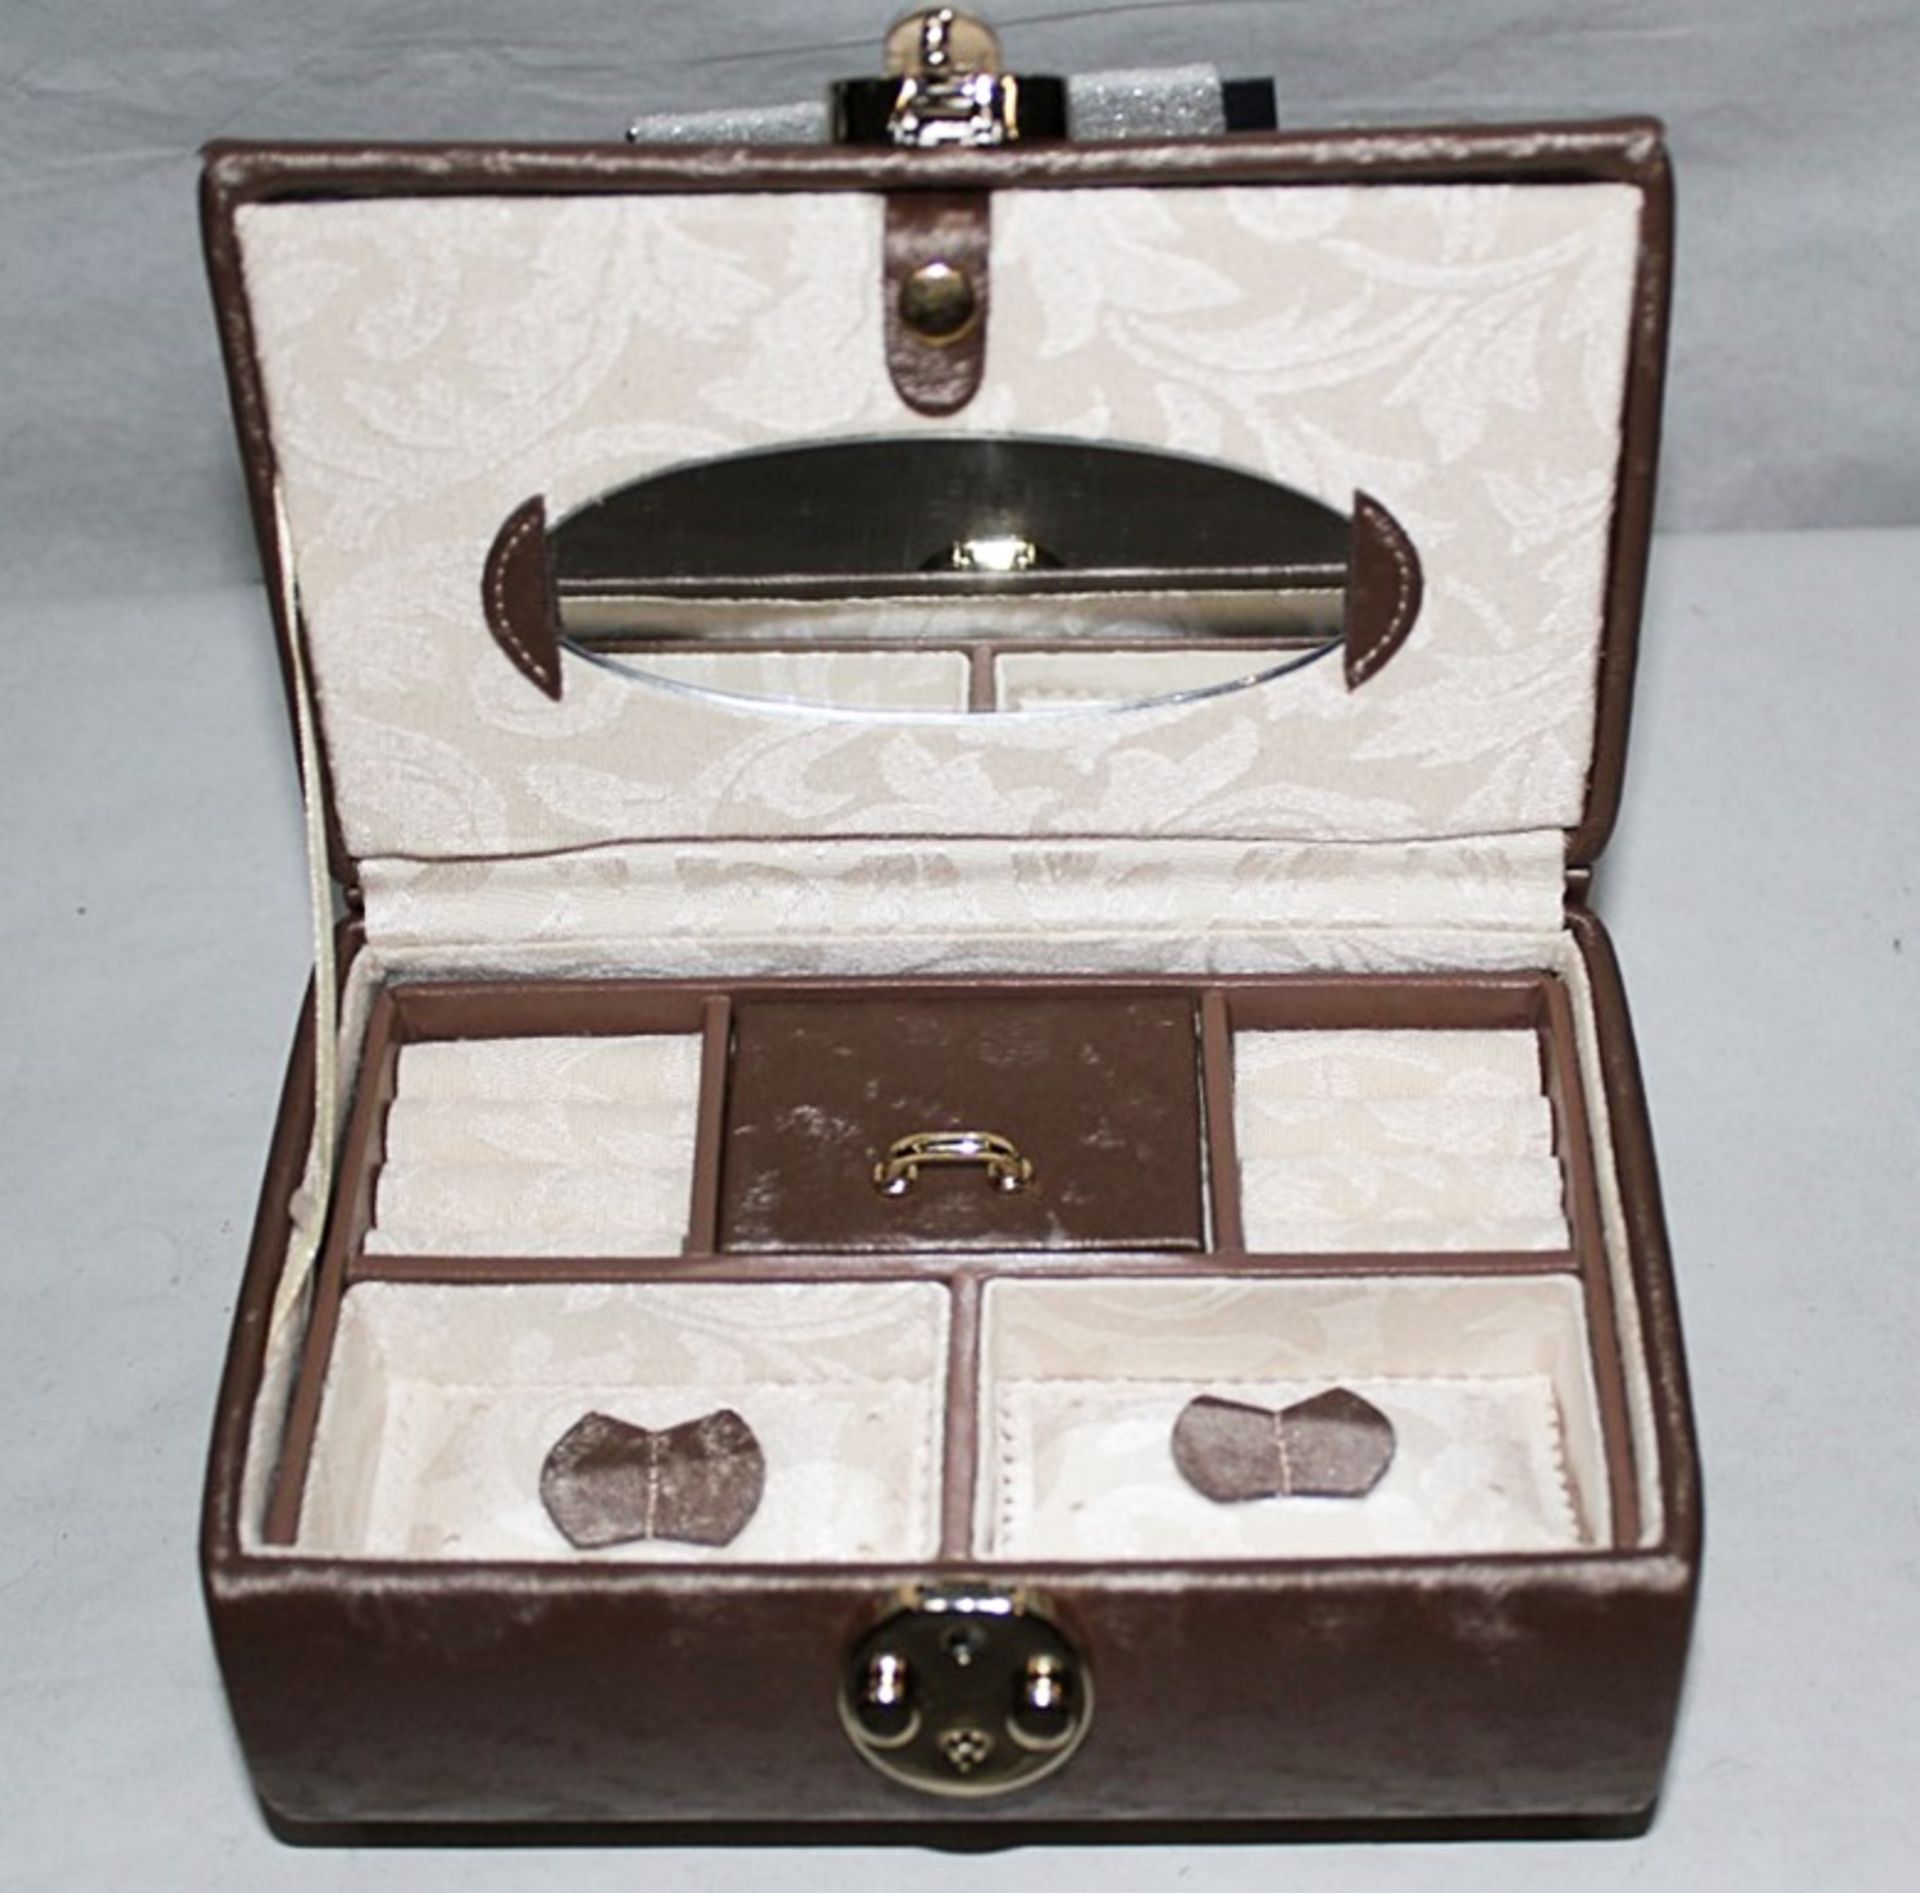 1 x "AB Collezioni" Italian Luxury Jewellery Box (33546) - Ref LT140  – Features A Pull-Out - Image 2 of 5